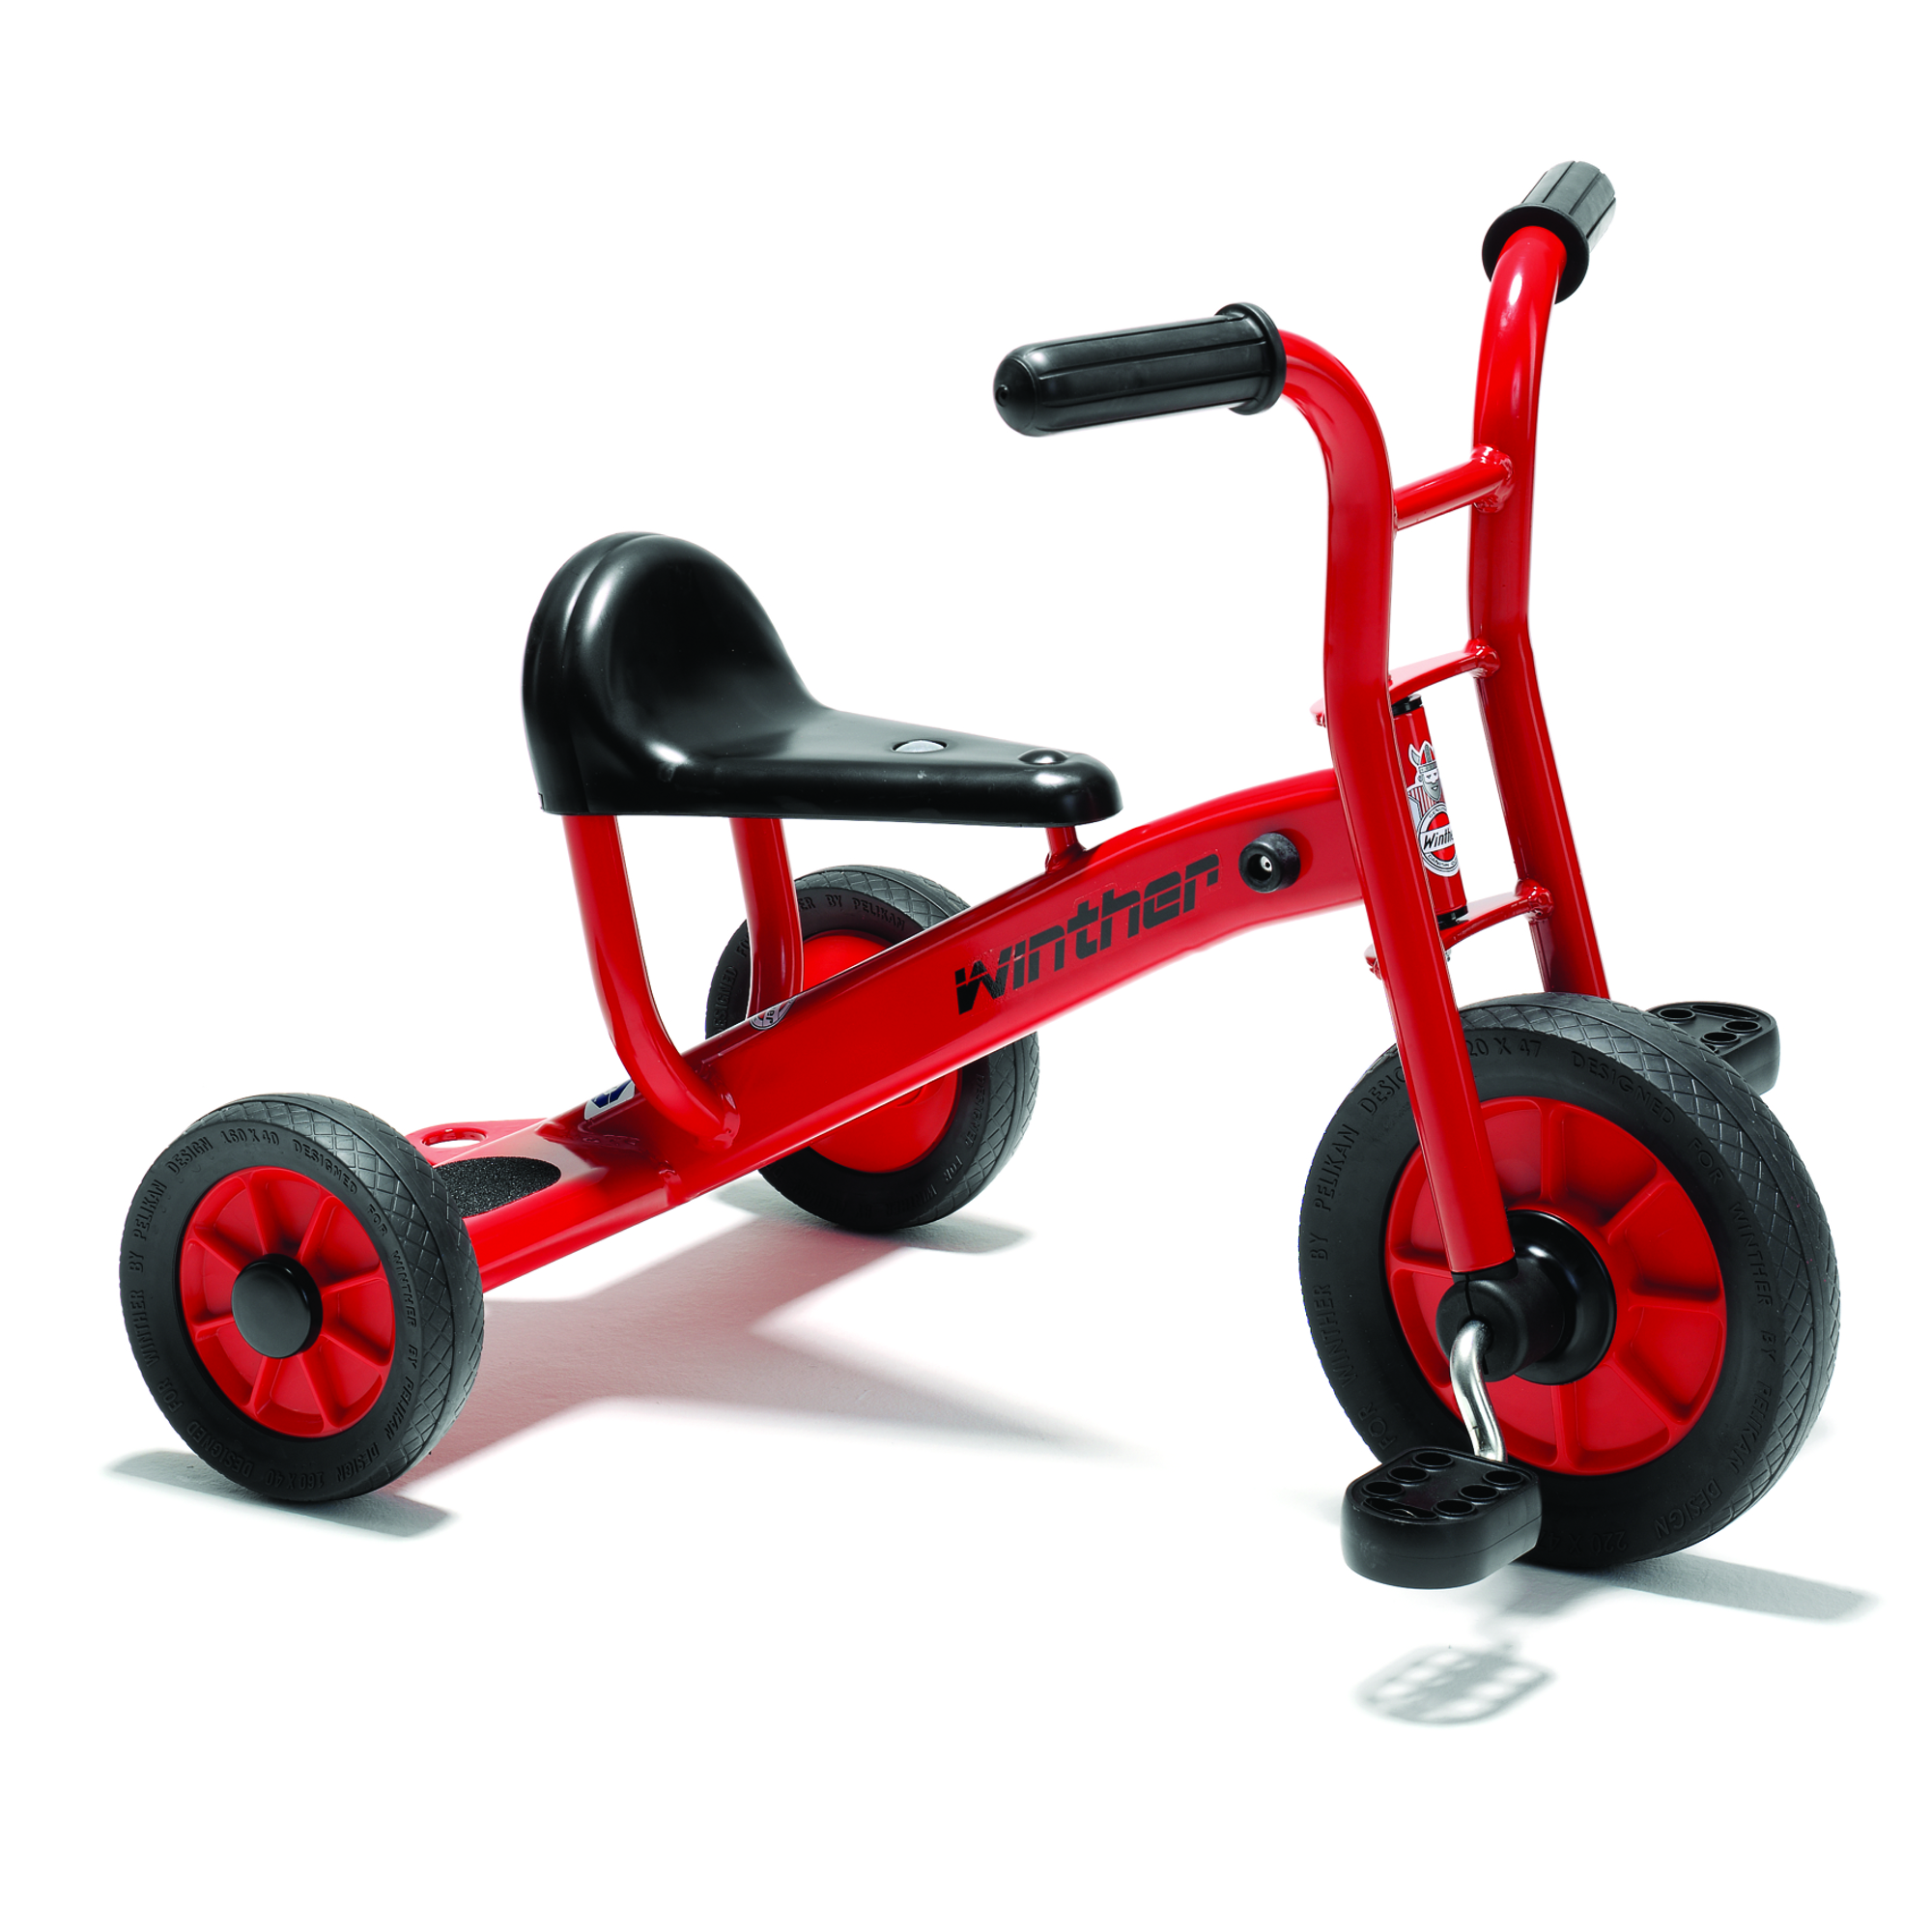 Winther Viking Tricycle Medium